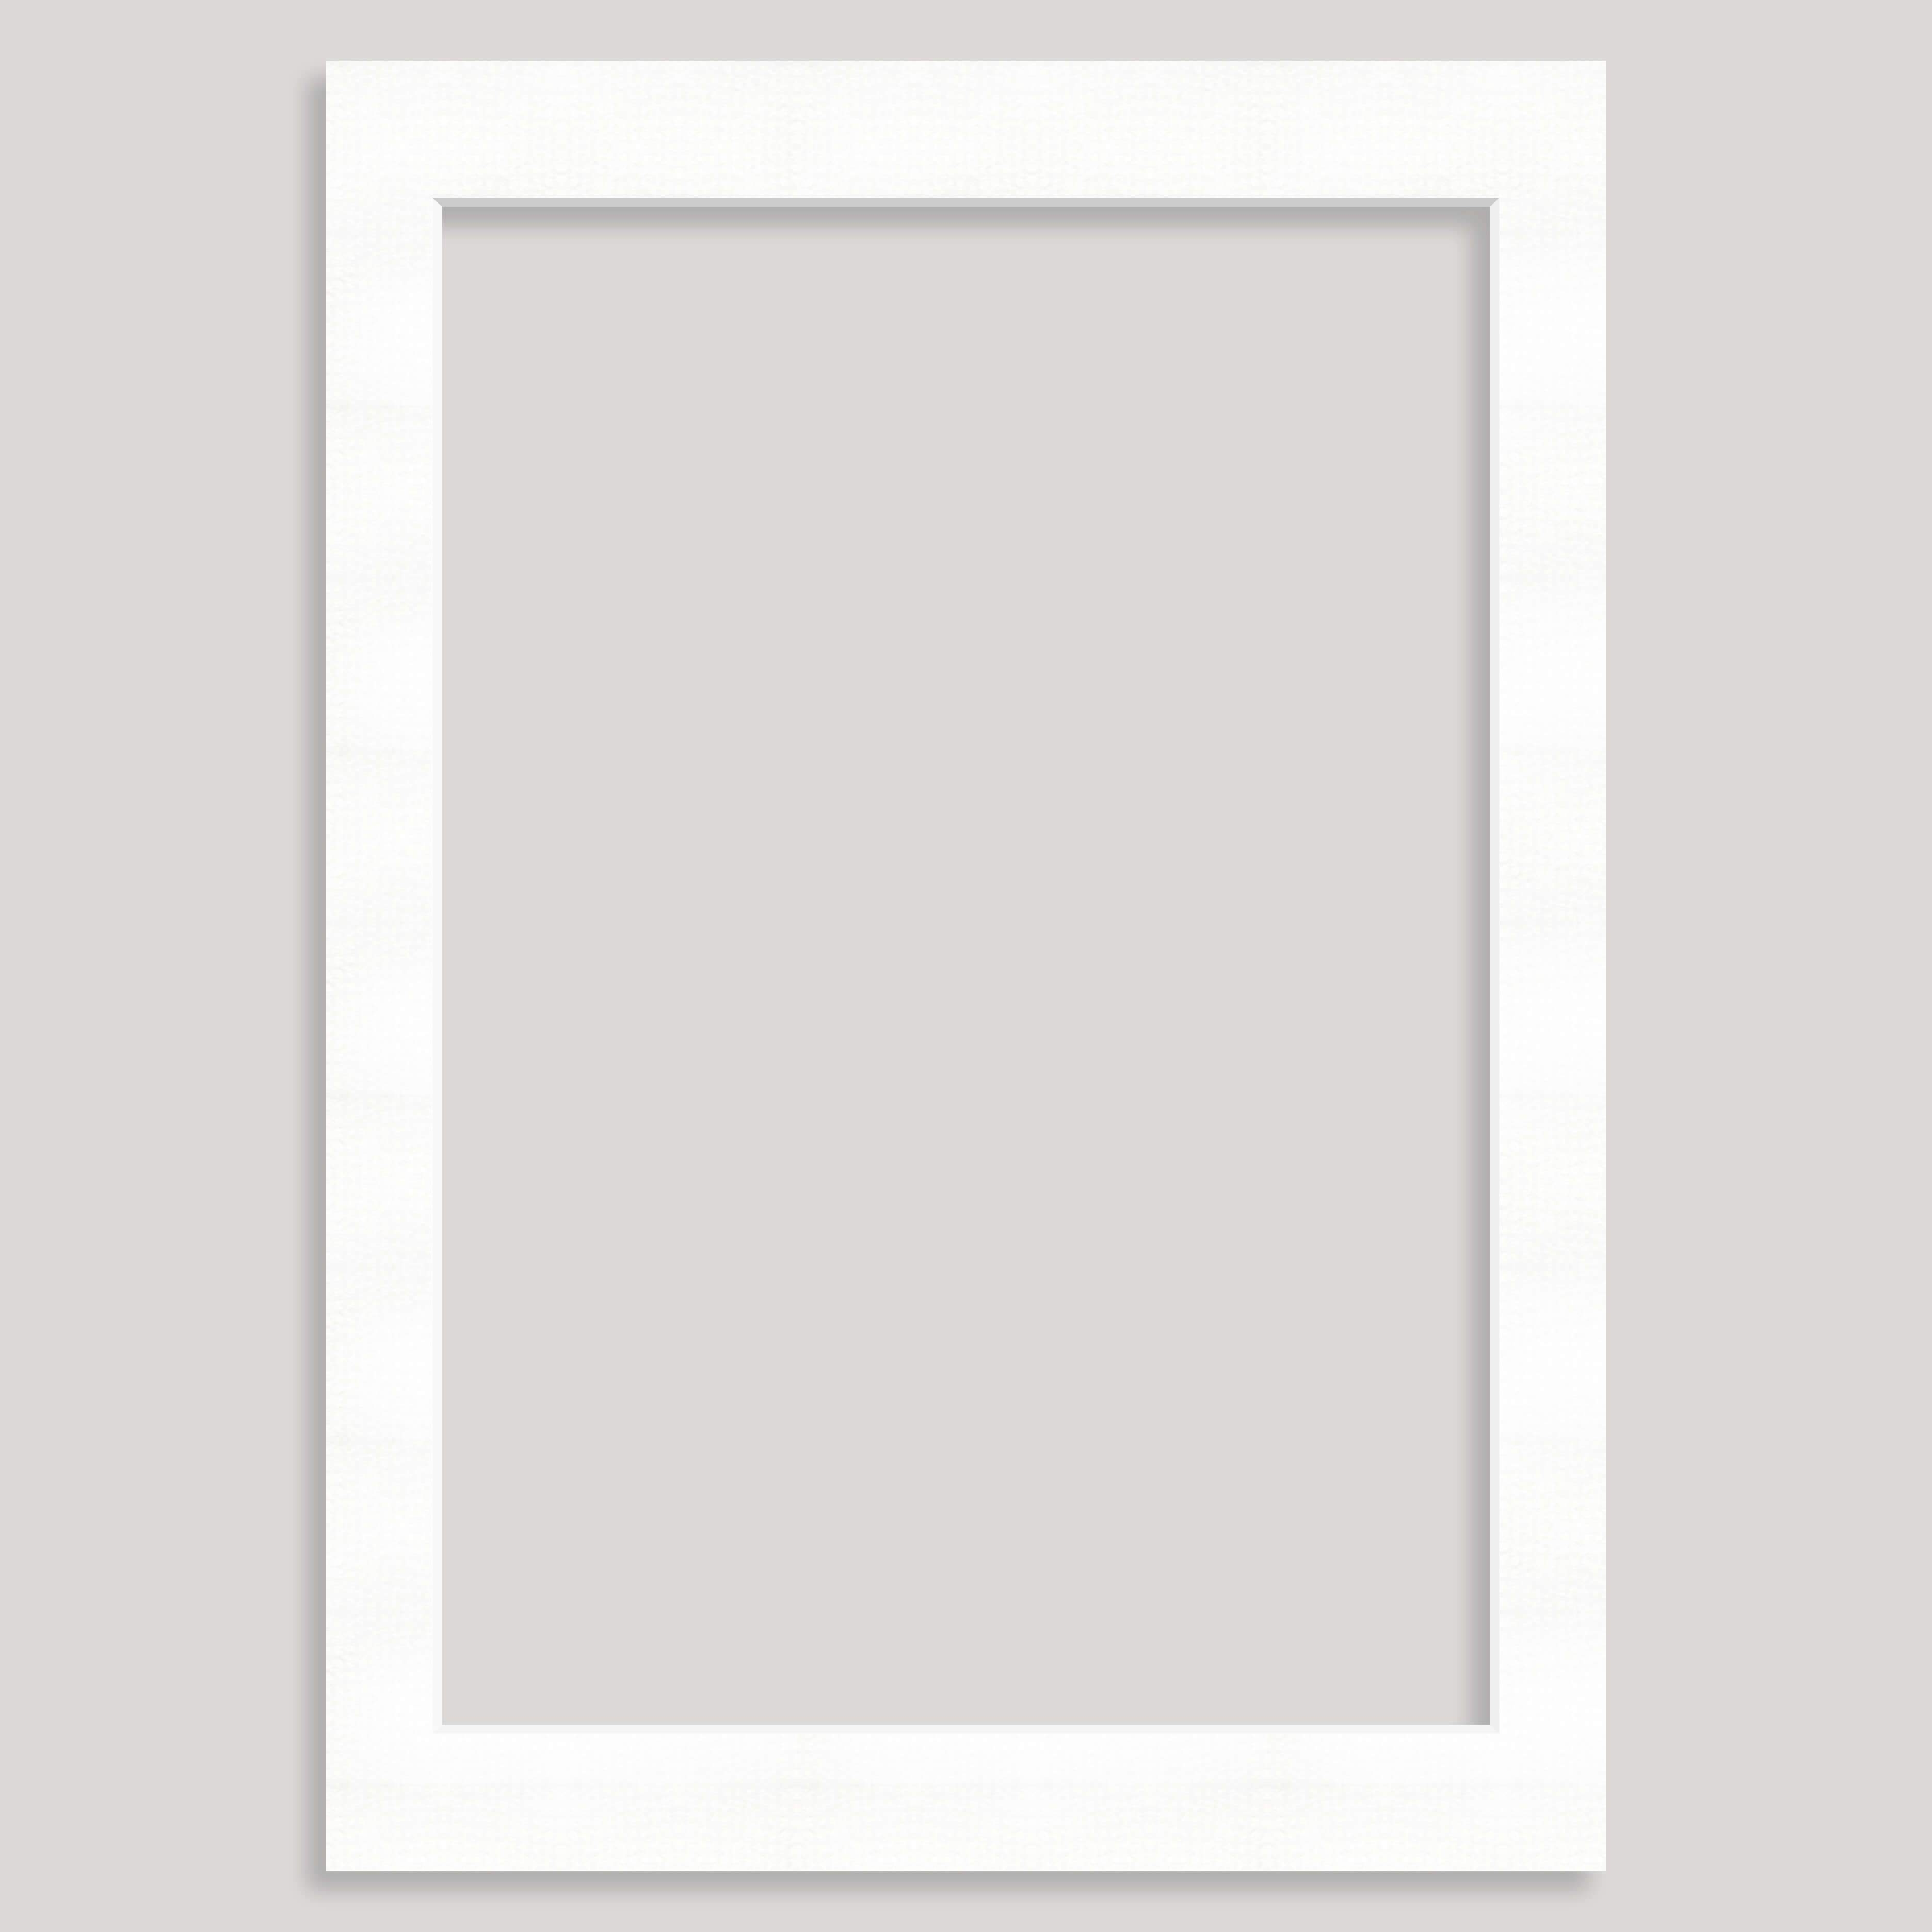 A4 Photo/Picture Mount for a 10x7inch Picture/Photo (individually bagged) – 8698 Glacier White